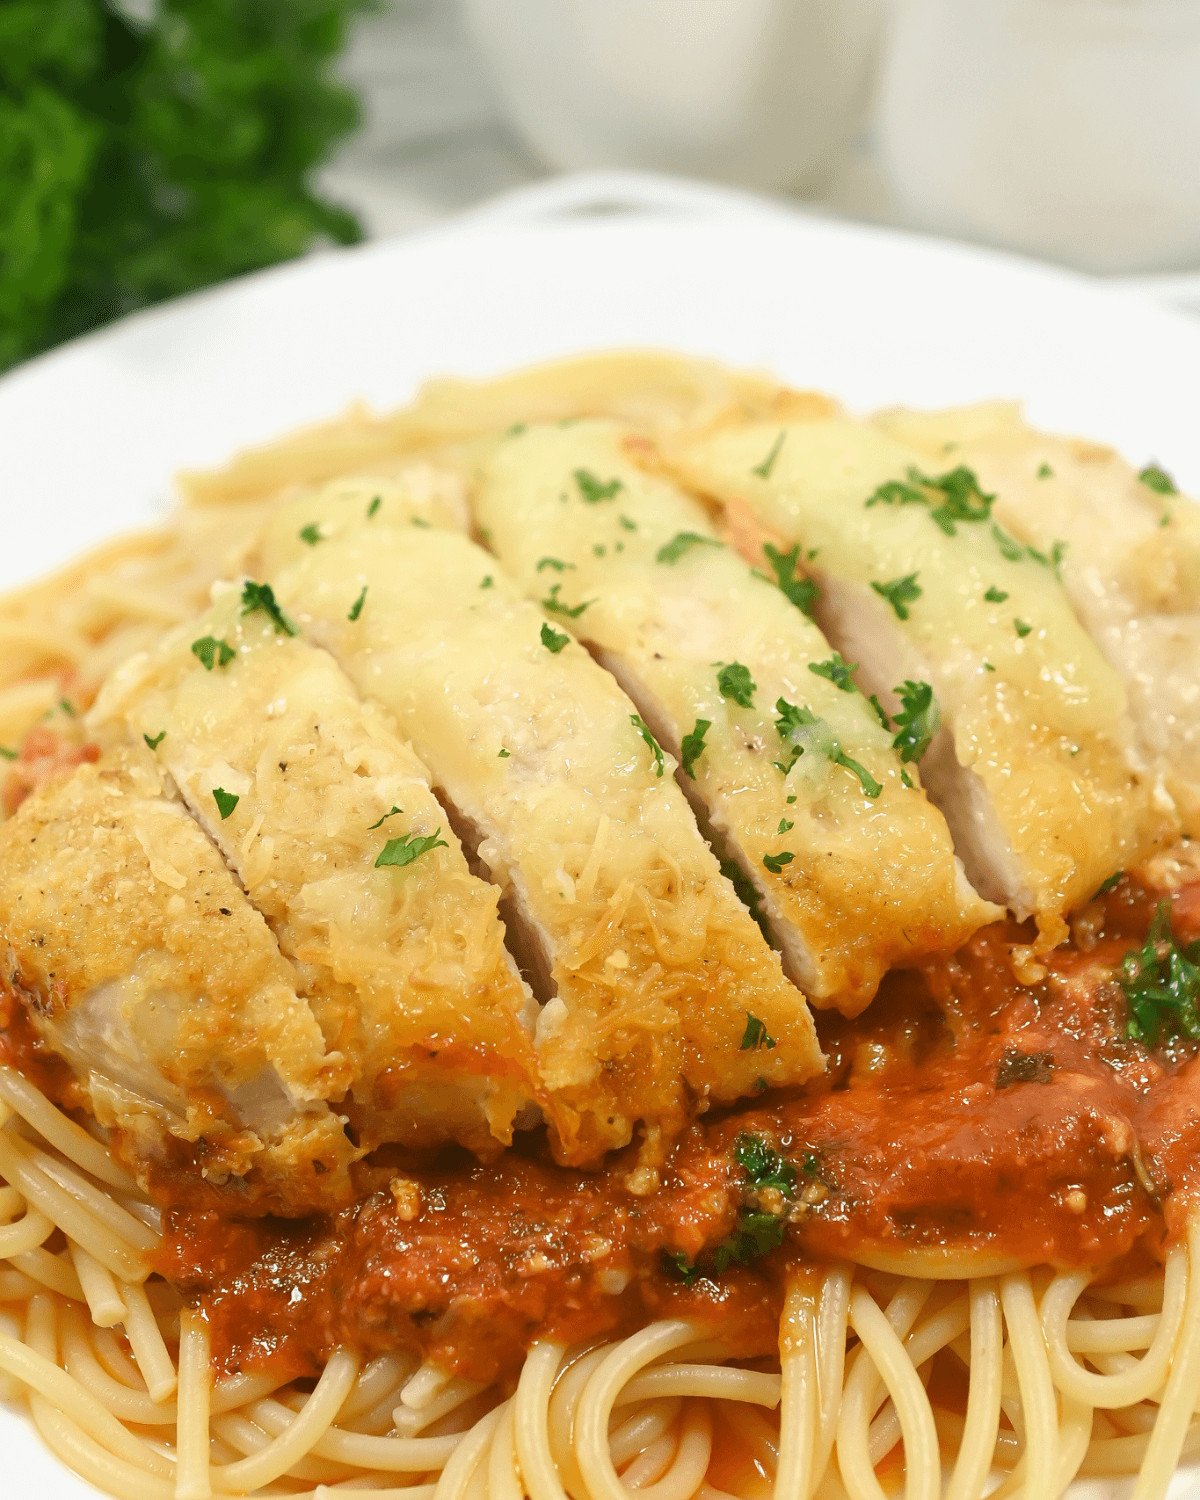 Slow cooker chicken parmesan with spaghetti.